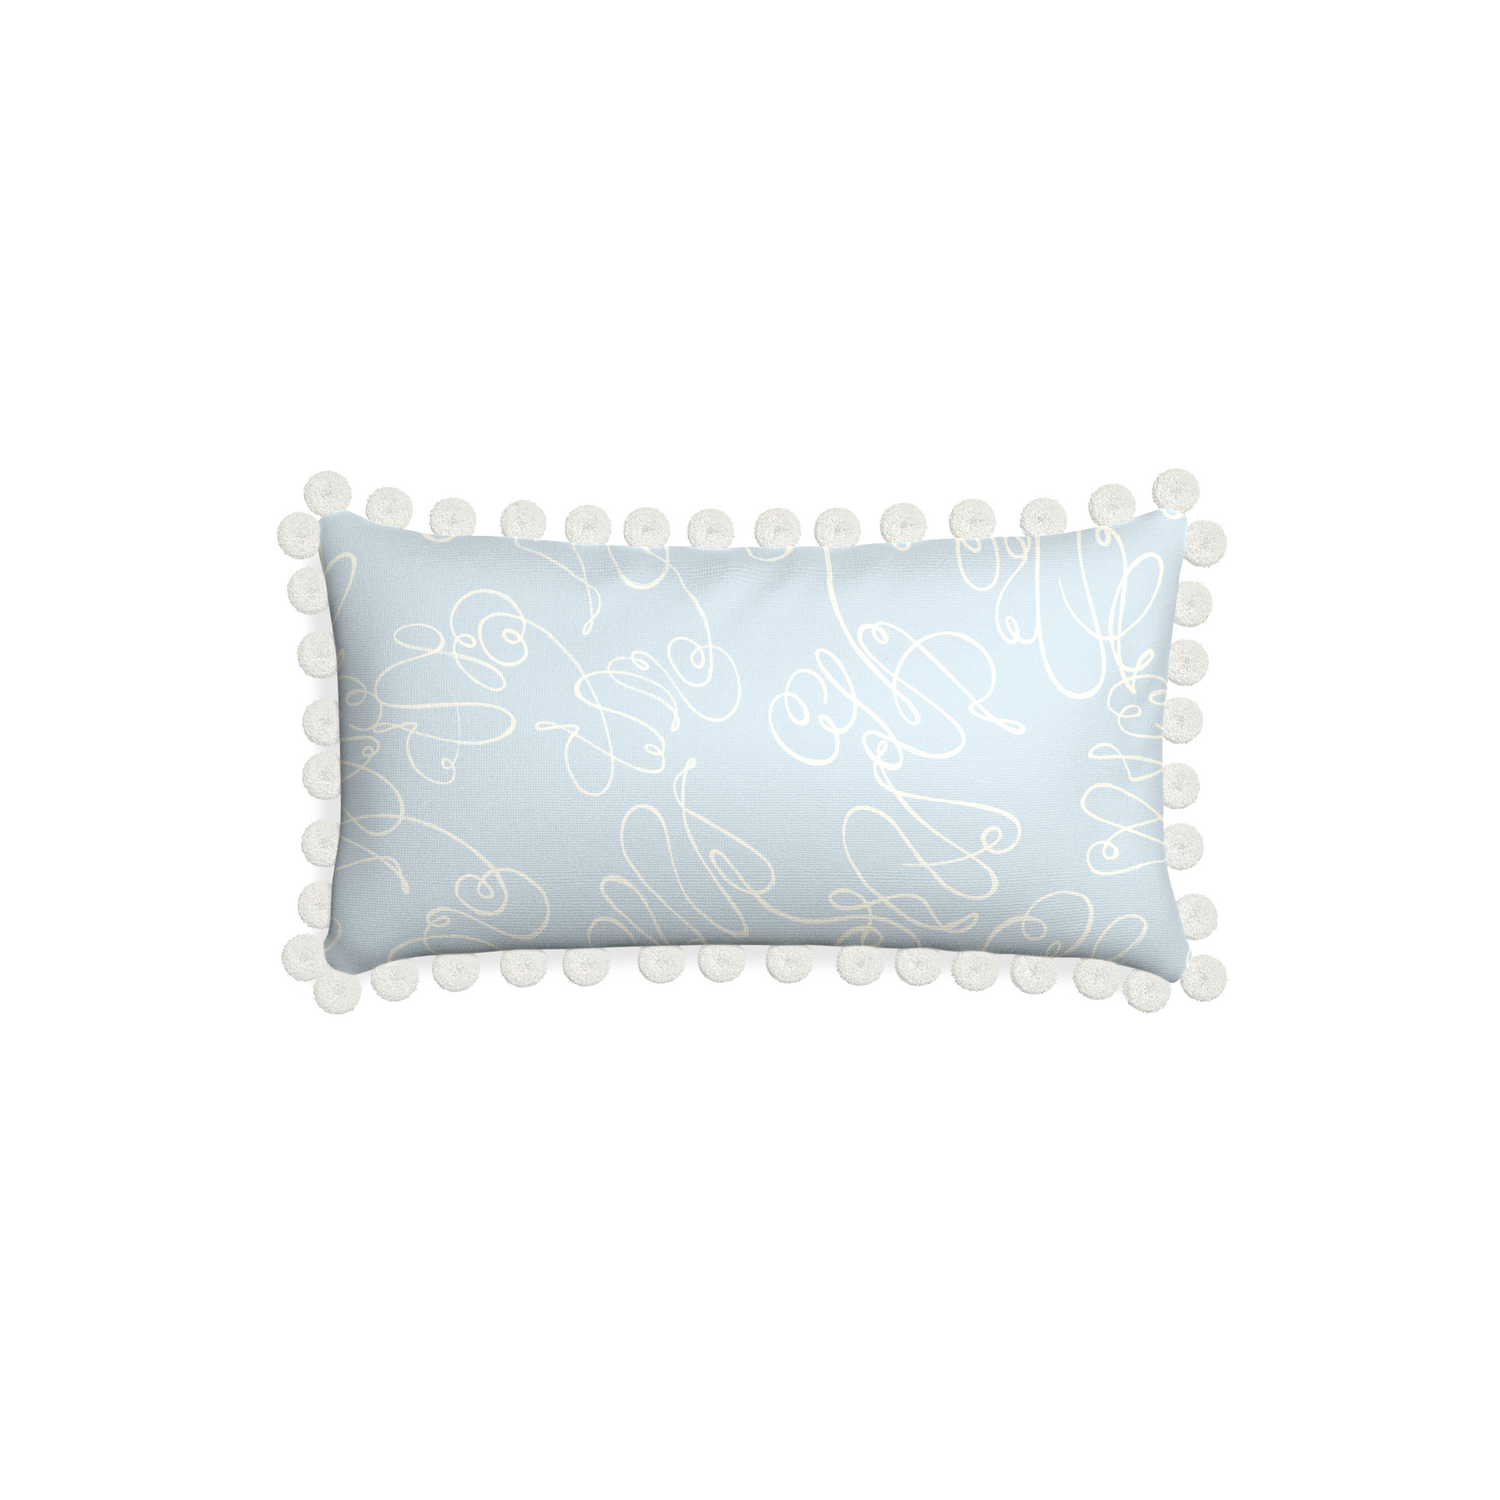 Petite-lumbar mirabella custom powder blue abstractpillow with snow pom pom on white background